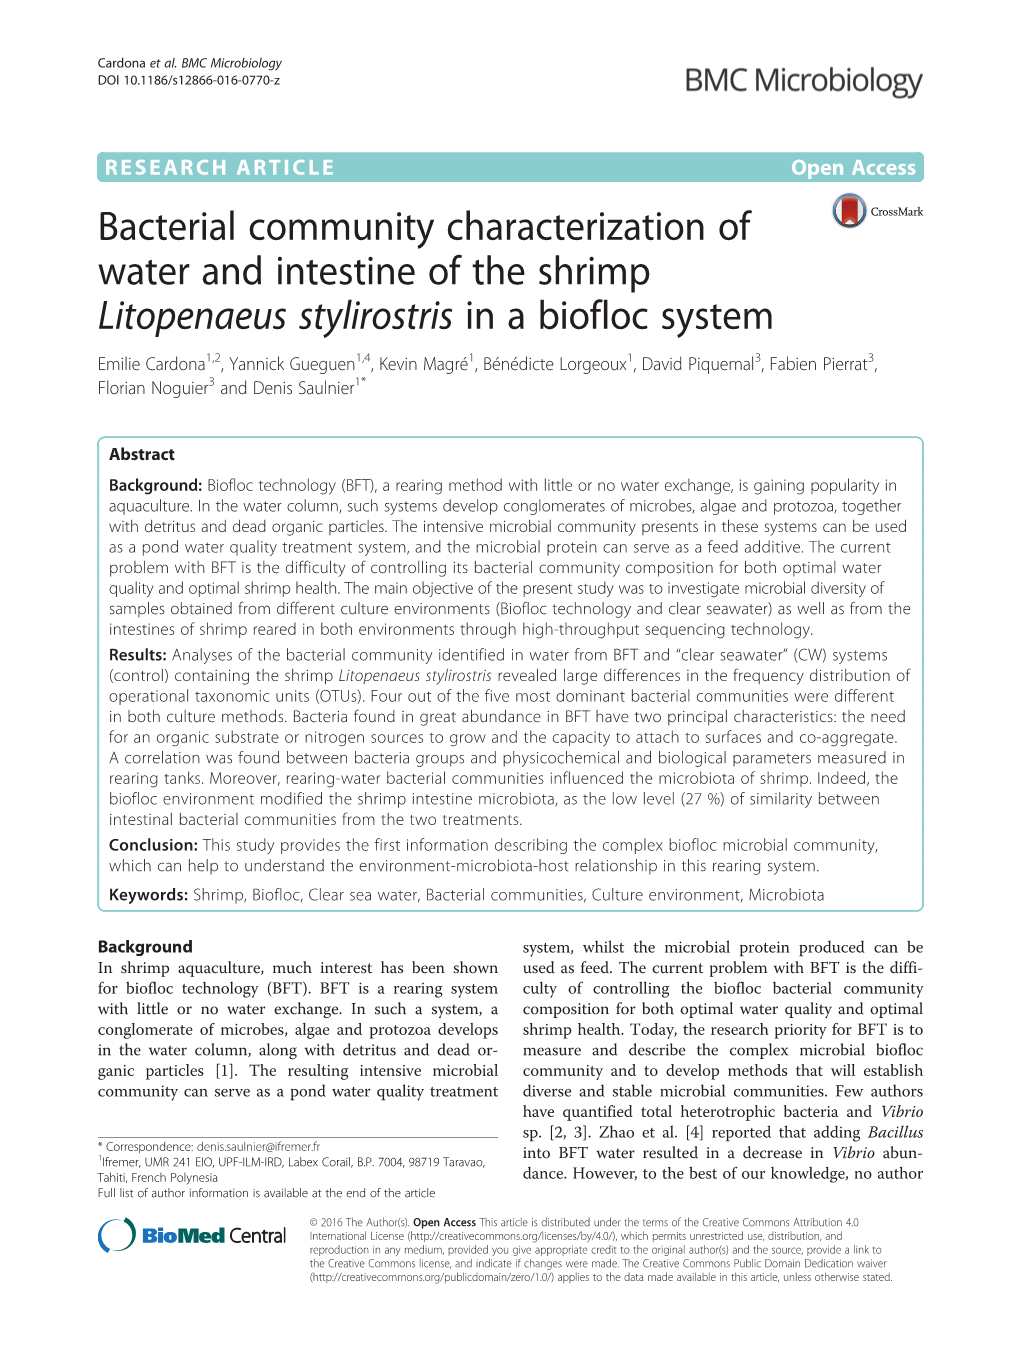 Bacterial Community Characterization of Water And